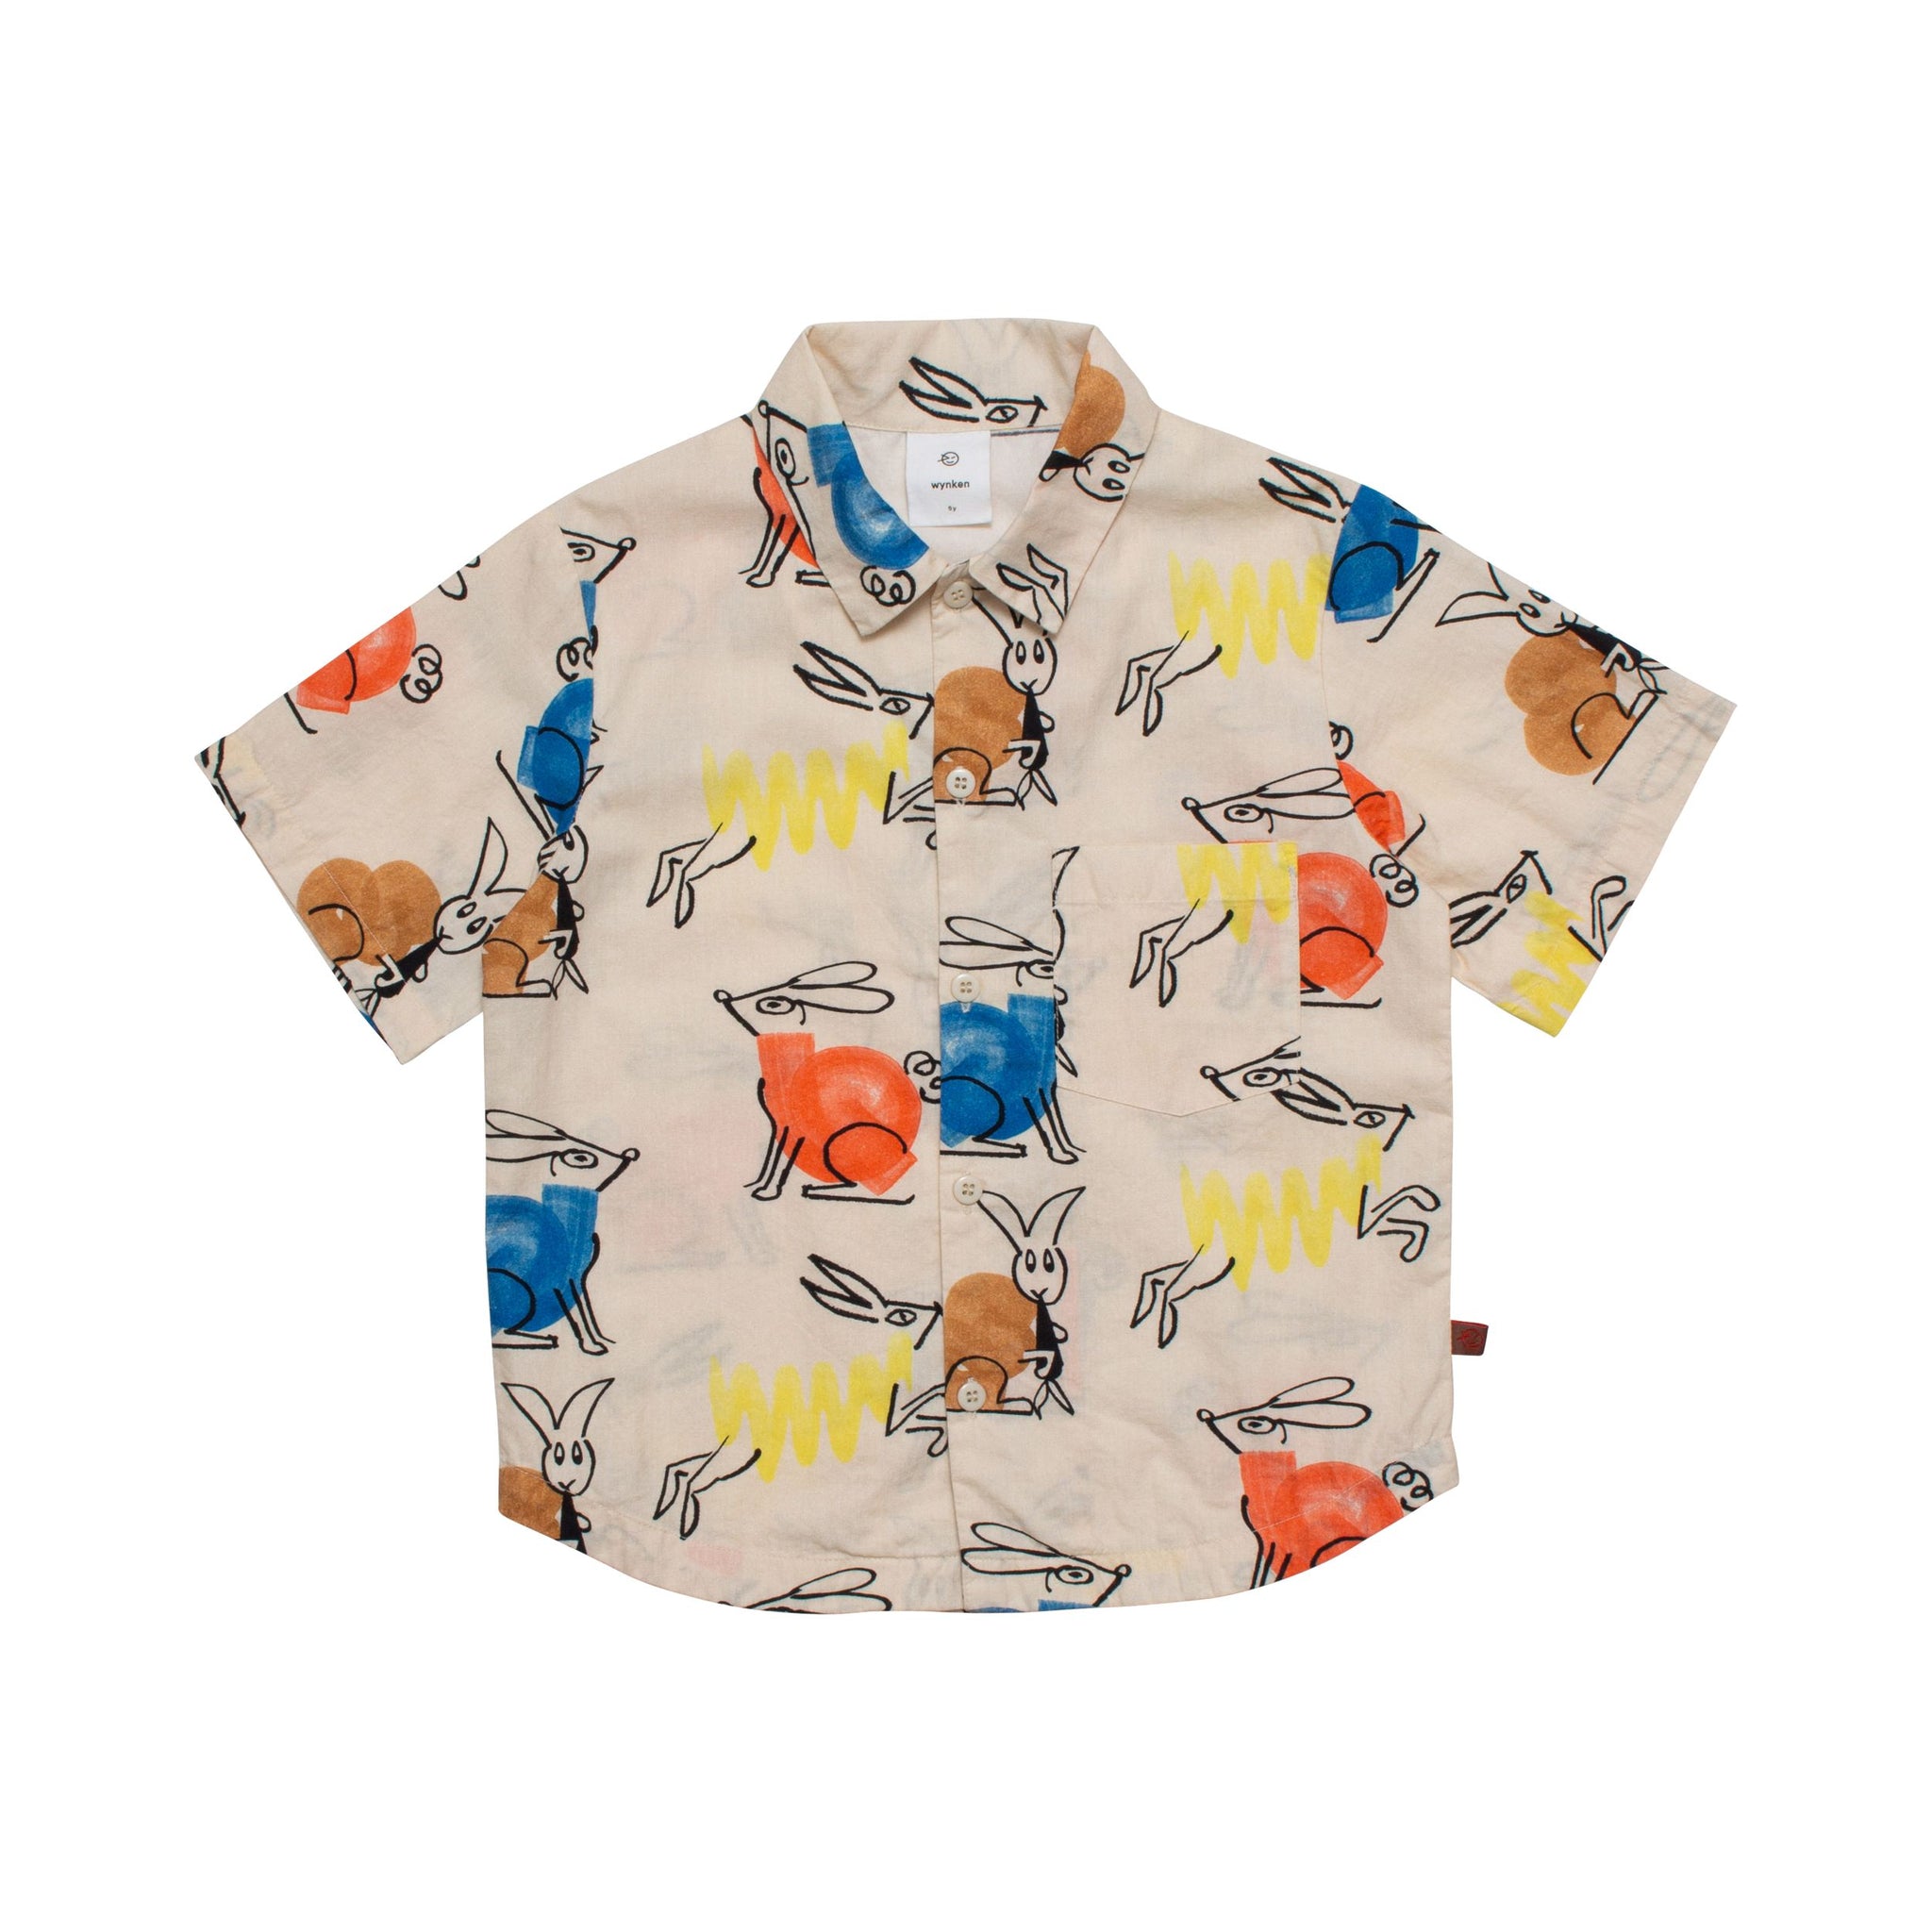 Day Shirt - Warm Sand / Multi Colours